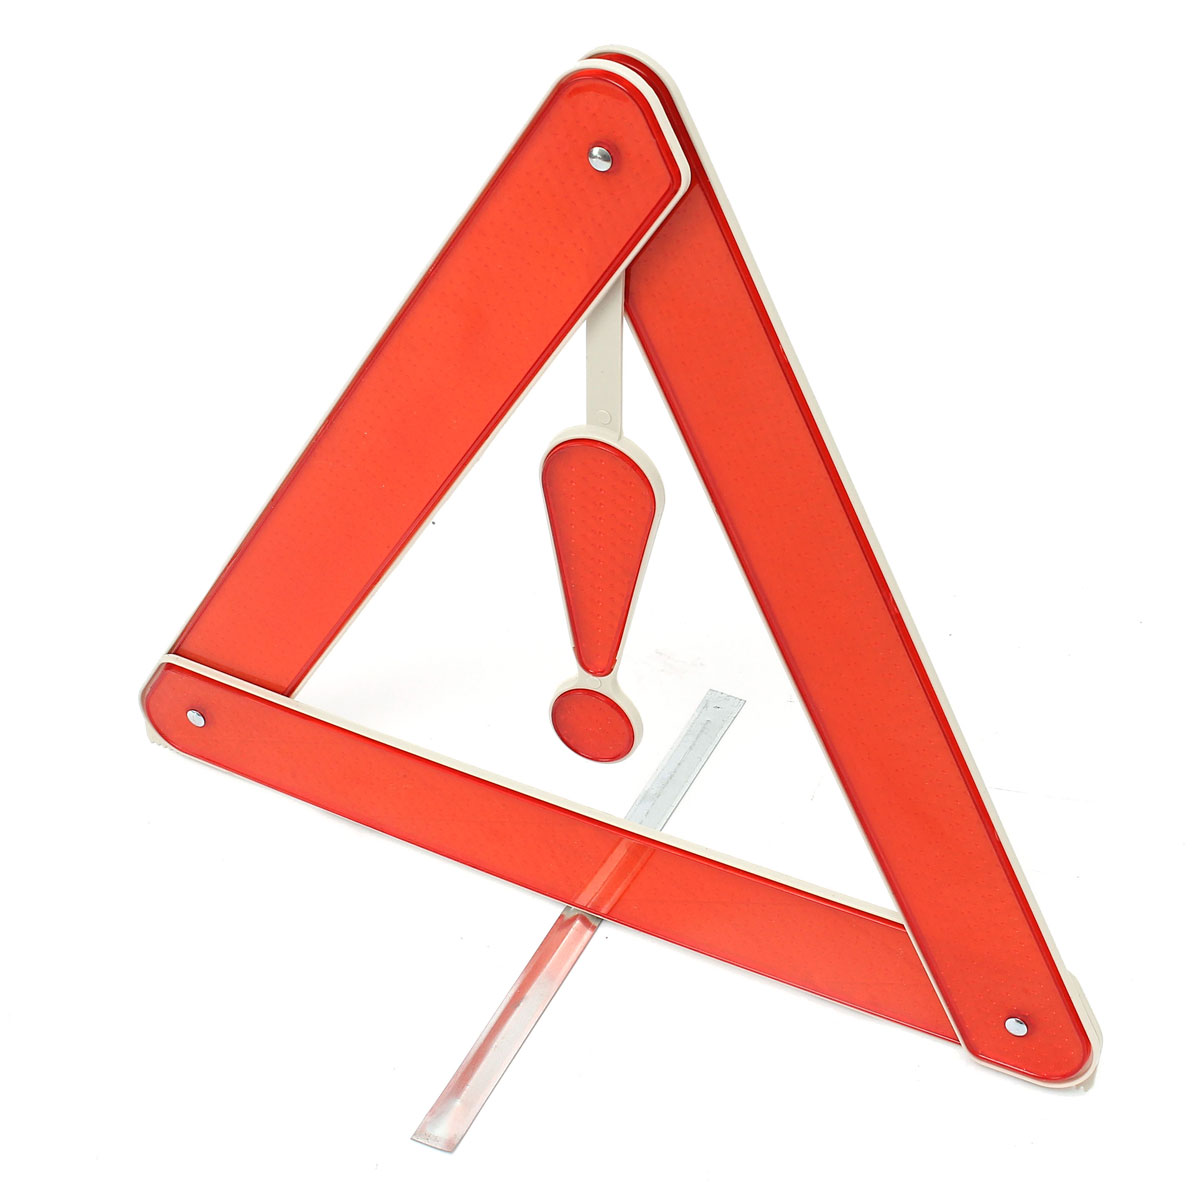 Compare Prices on Hazard Warning Triangle- Online Shopping/Buy Low ...